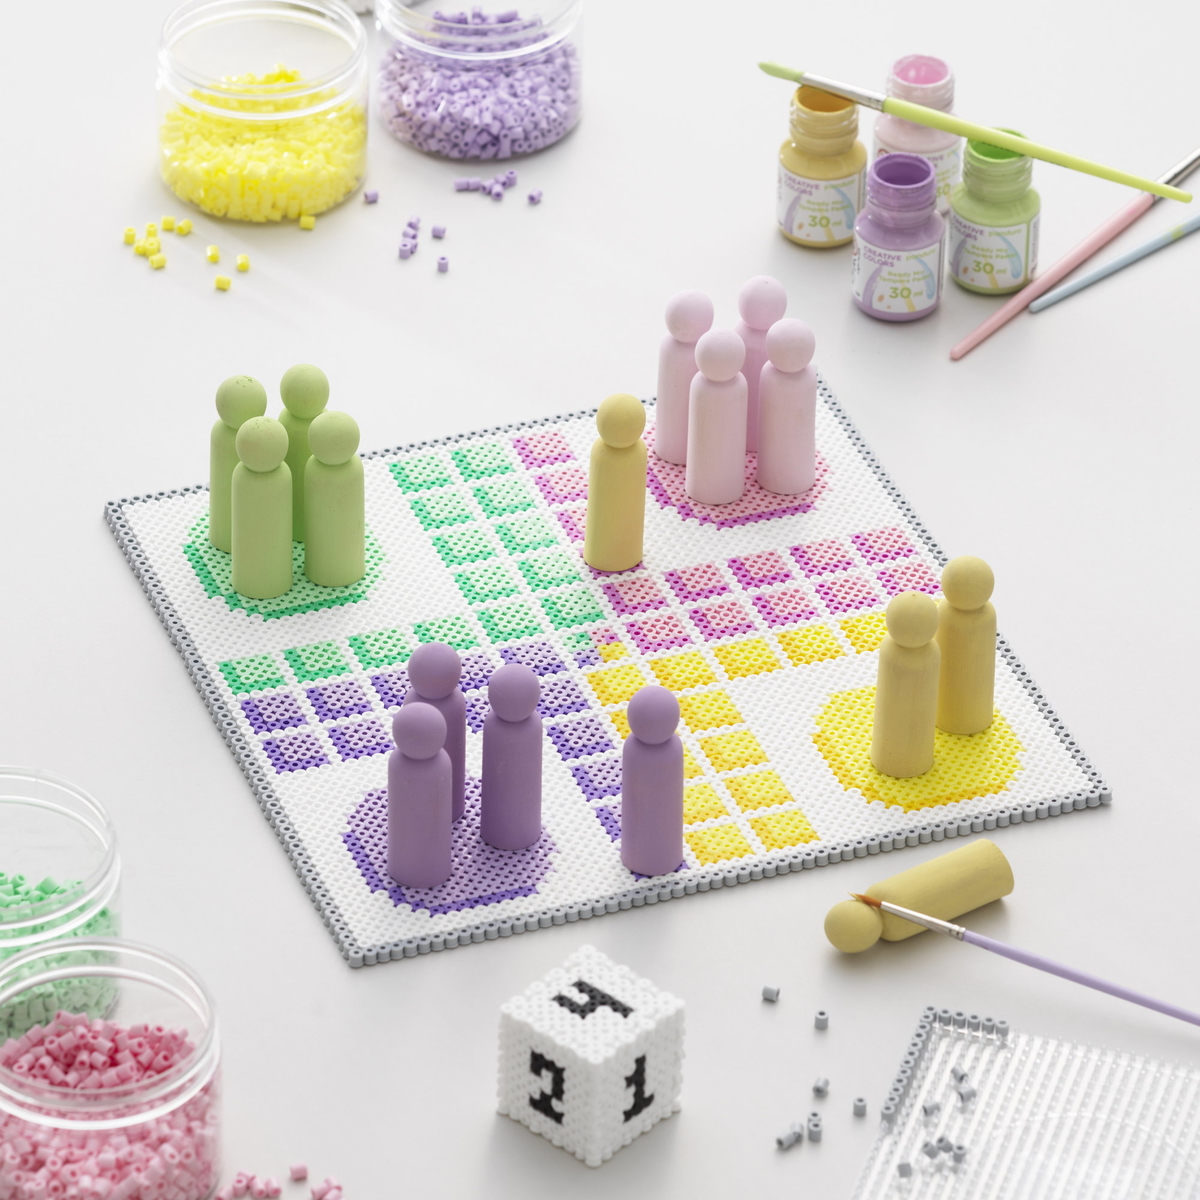 Make your own Ludo-inspired game